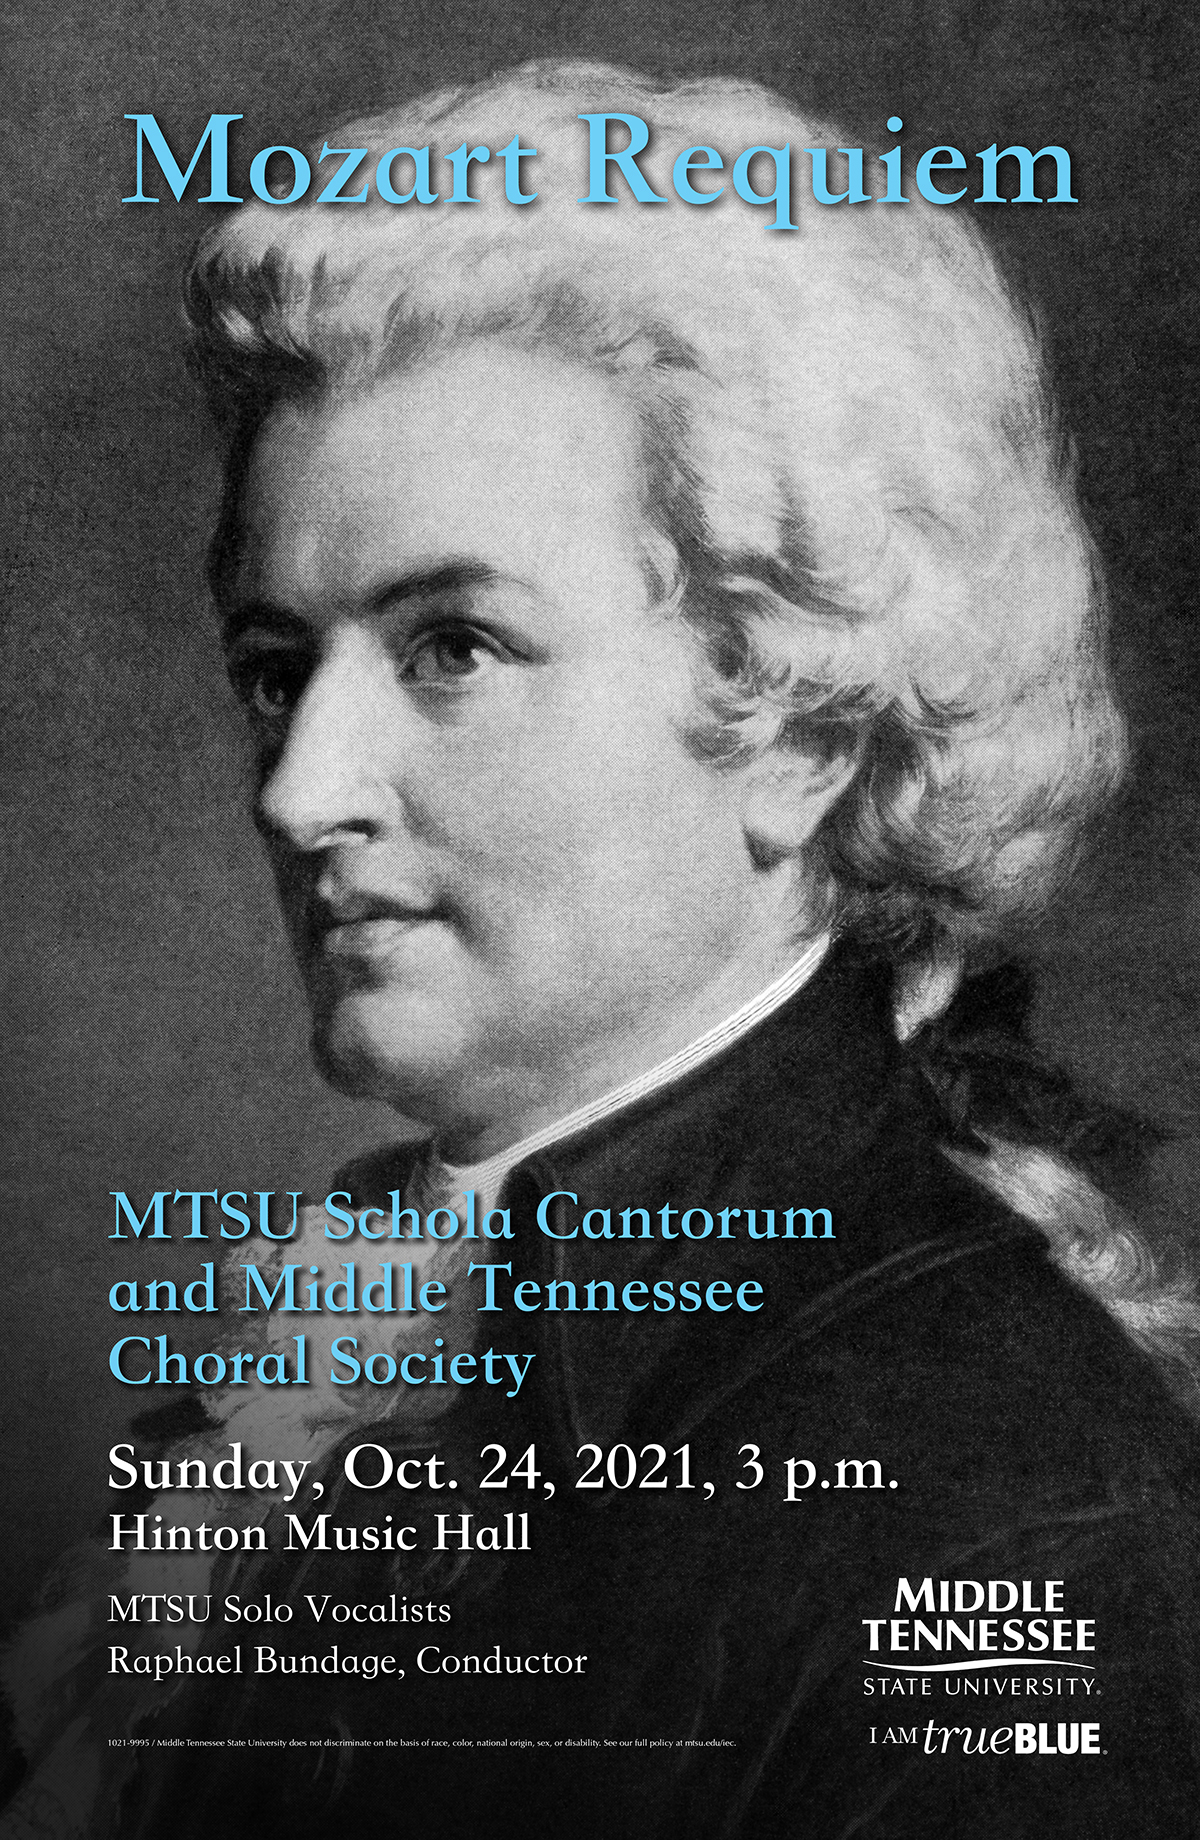 poster for Sunday, Oct. 24, performance of Mozart’s “Requeim” by the MTSU Schola Cantorum and Middle Tennessee Choral Society at MTSU’s Wright Music Building